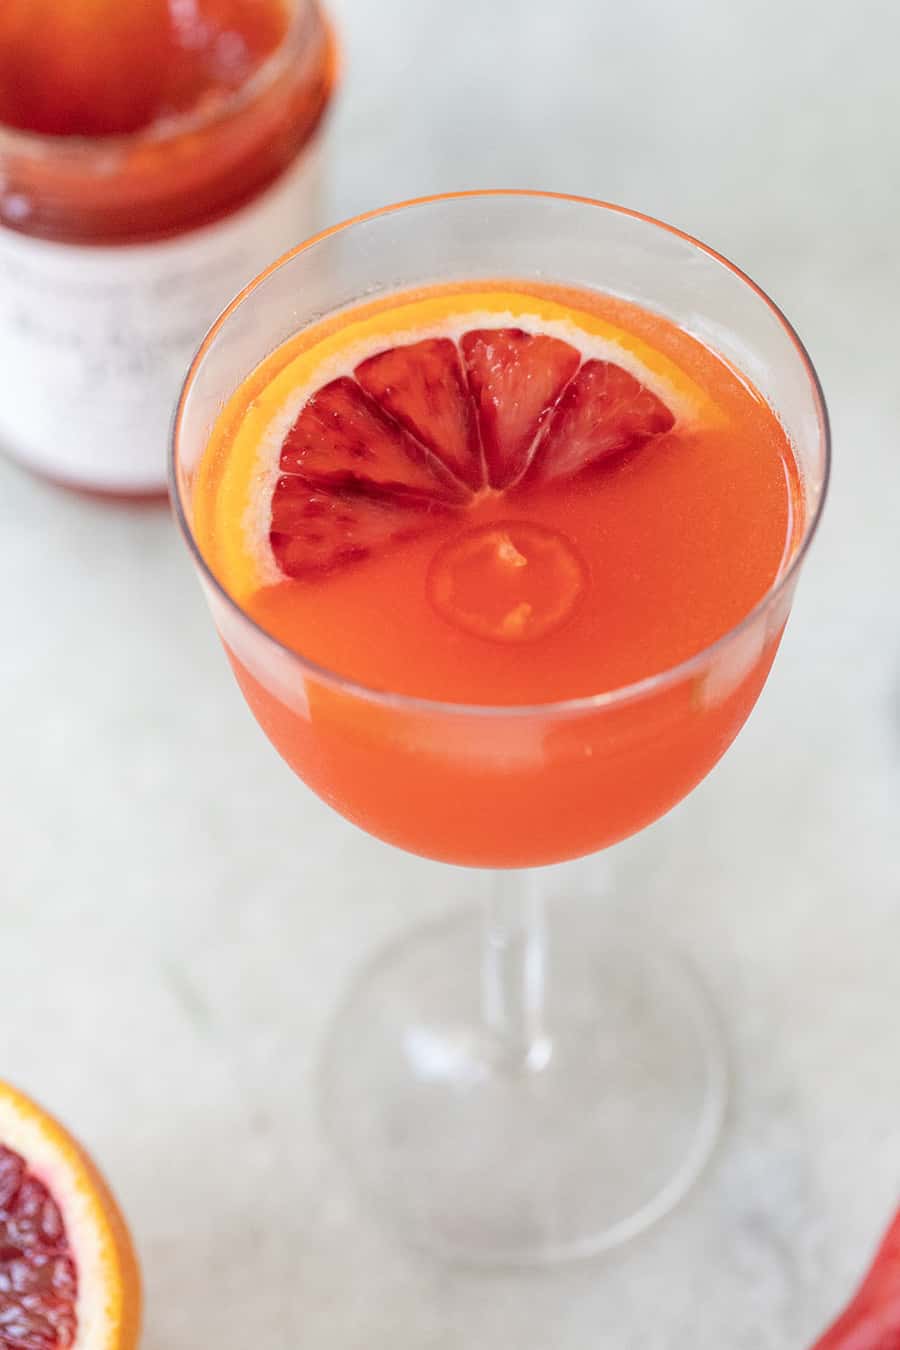 Red Pepper Jelly Cocktail with Blood Orange in a coup glass